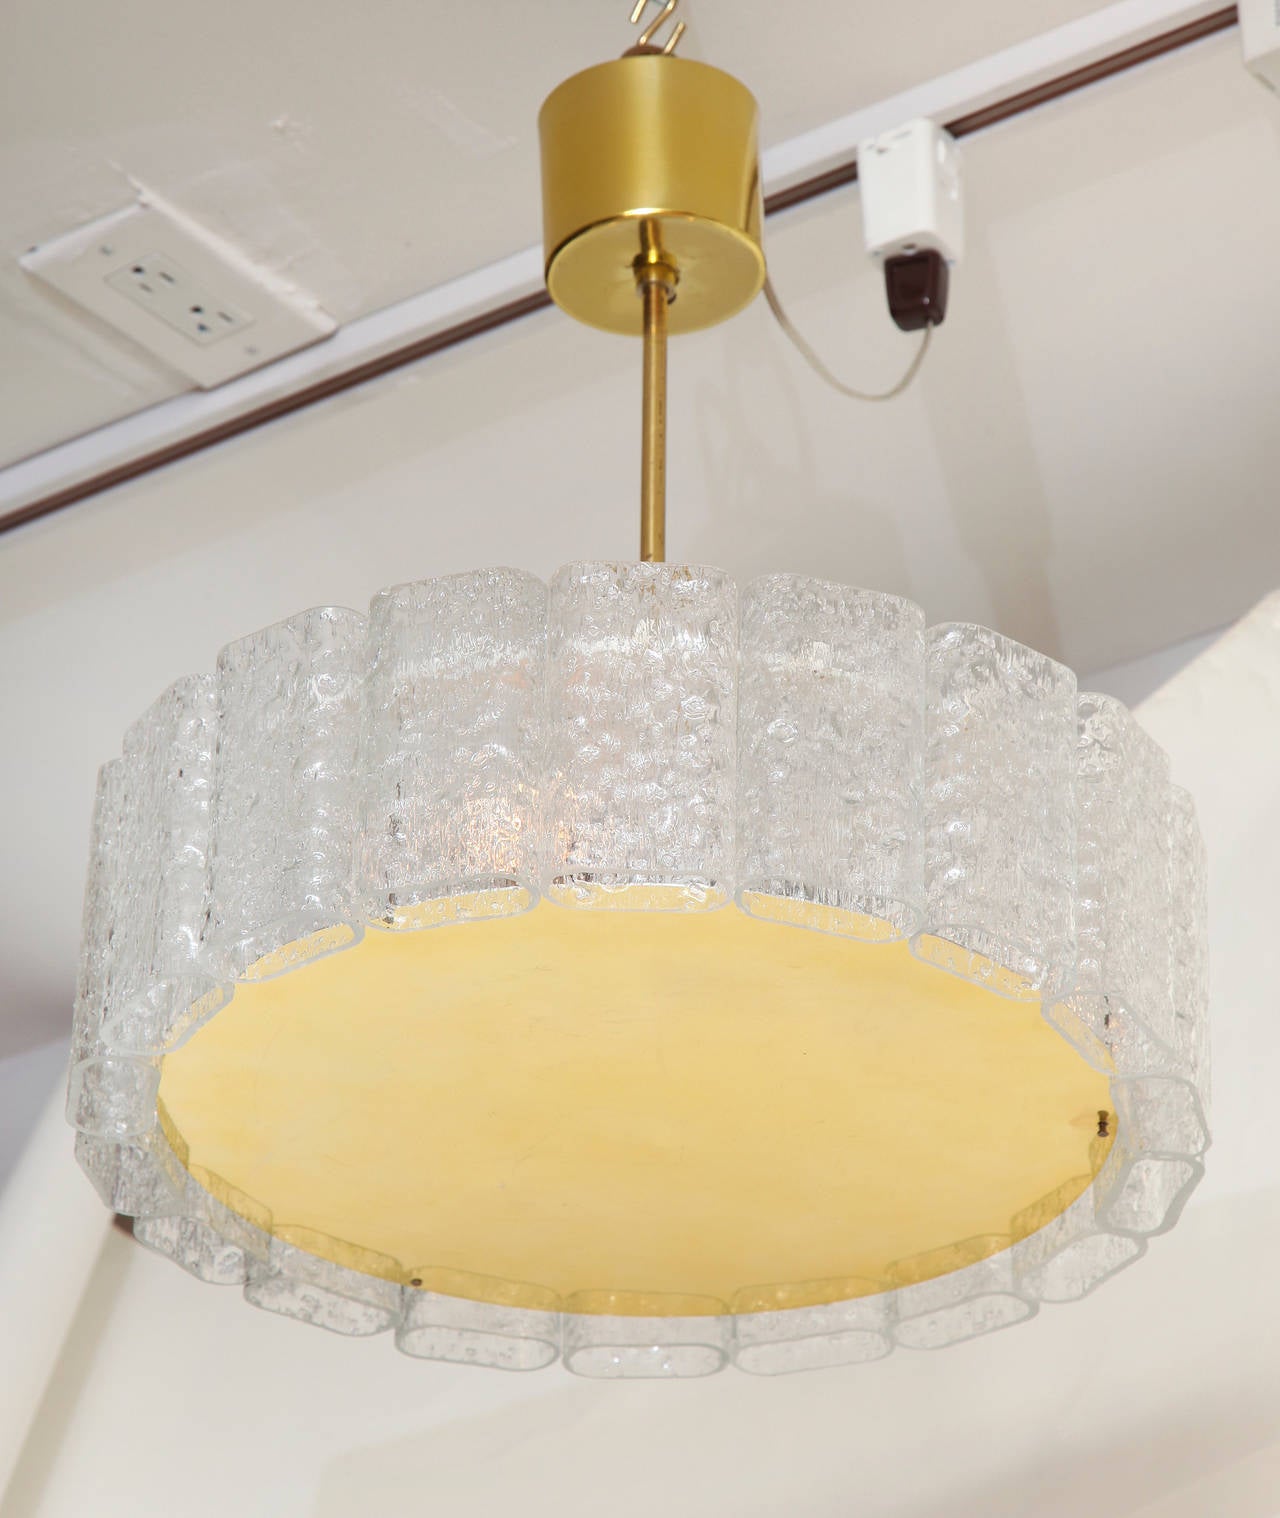 A contemporary design ceiling fixture with glass cylinders. The flat polished brass disc on underside surrounded by textured oval glass cylinders.